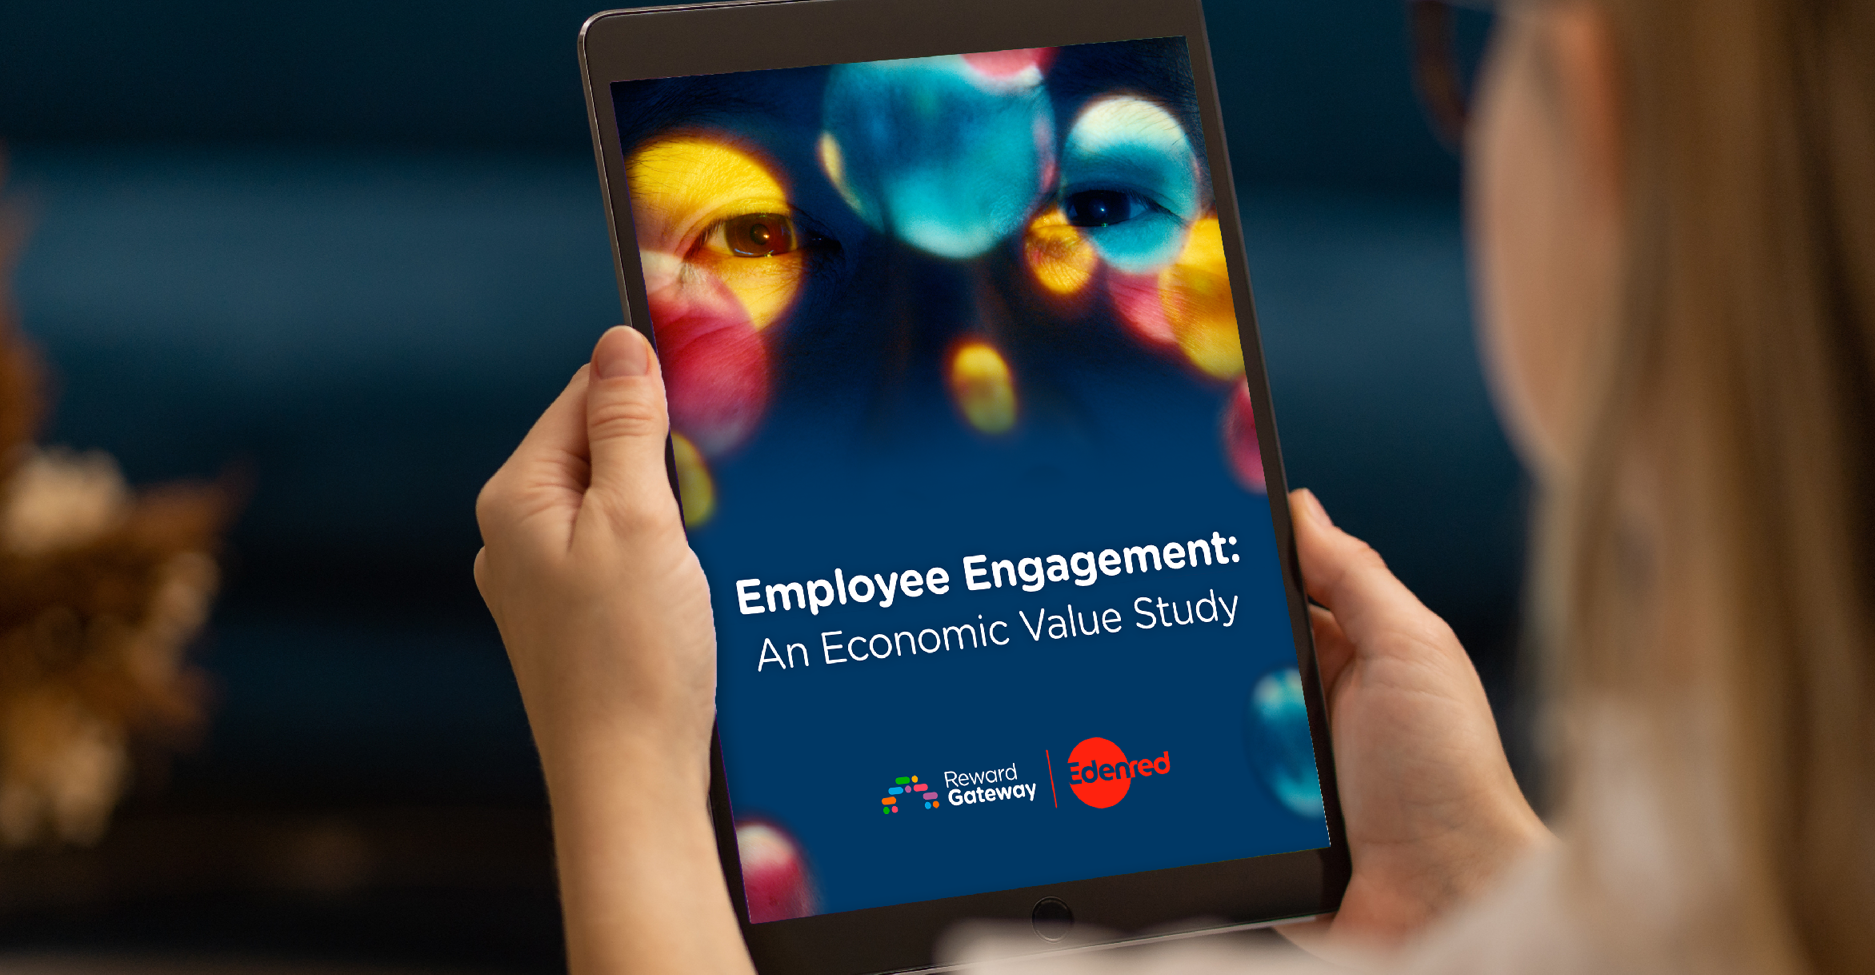 Download our Economic Value Study that draws a clear line between employee engagement and business performance, identifying key HR solutions that drive growth